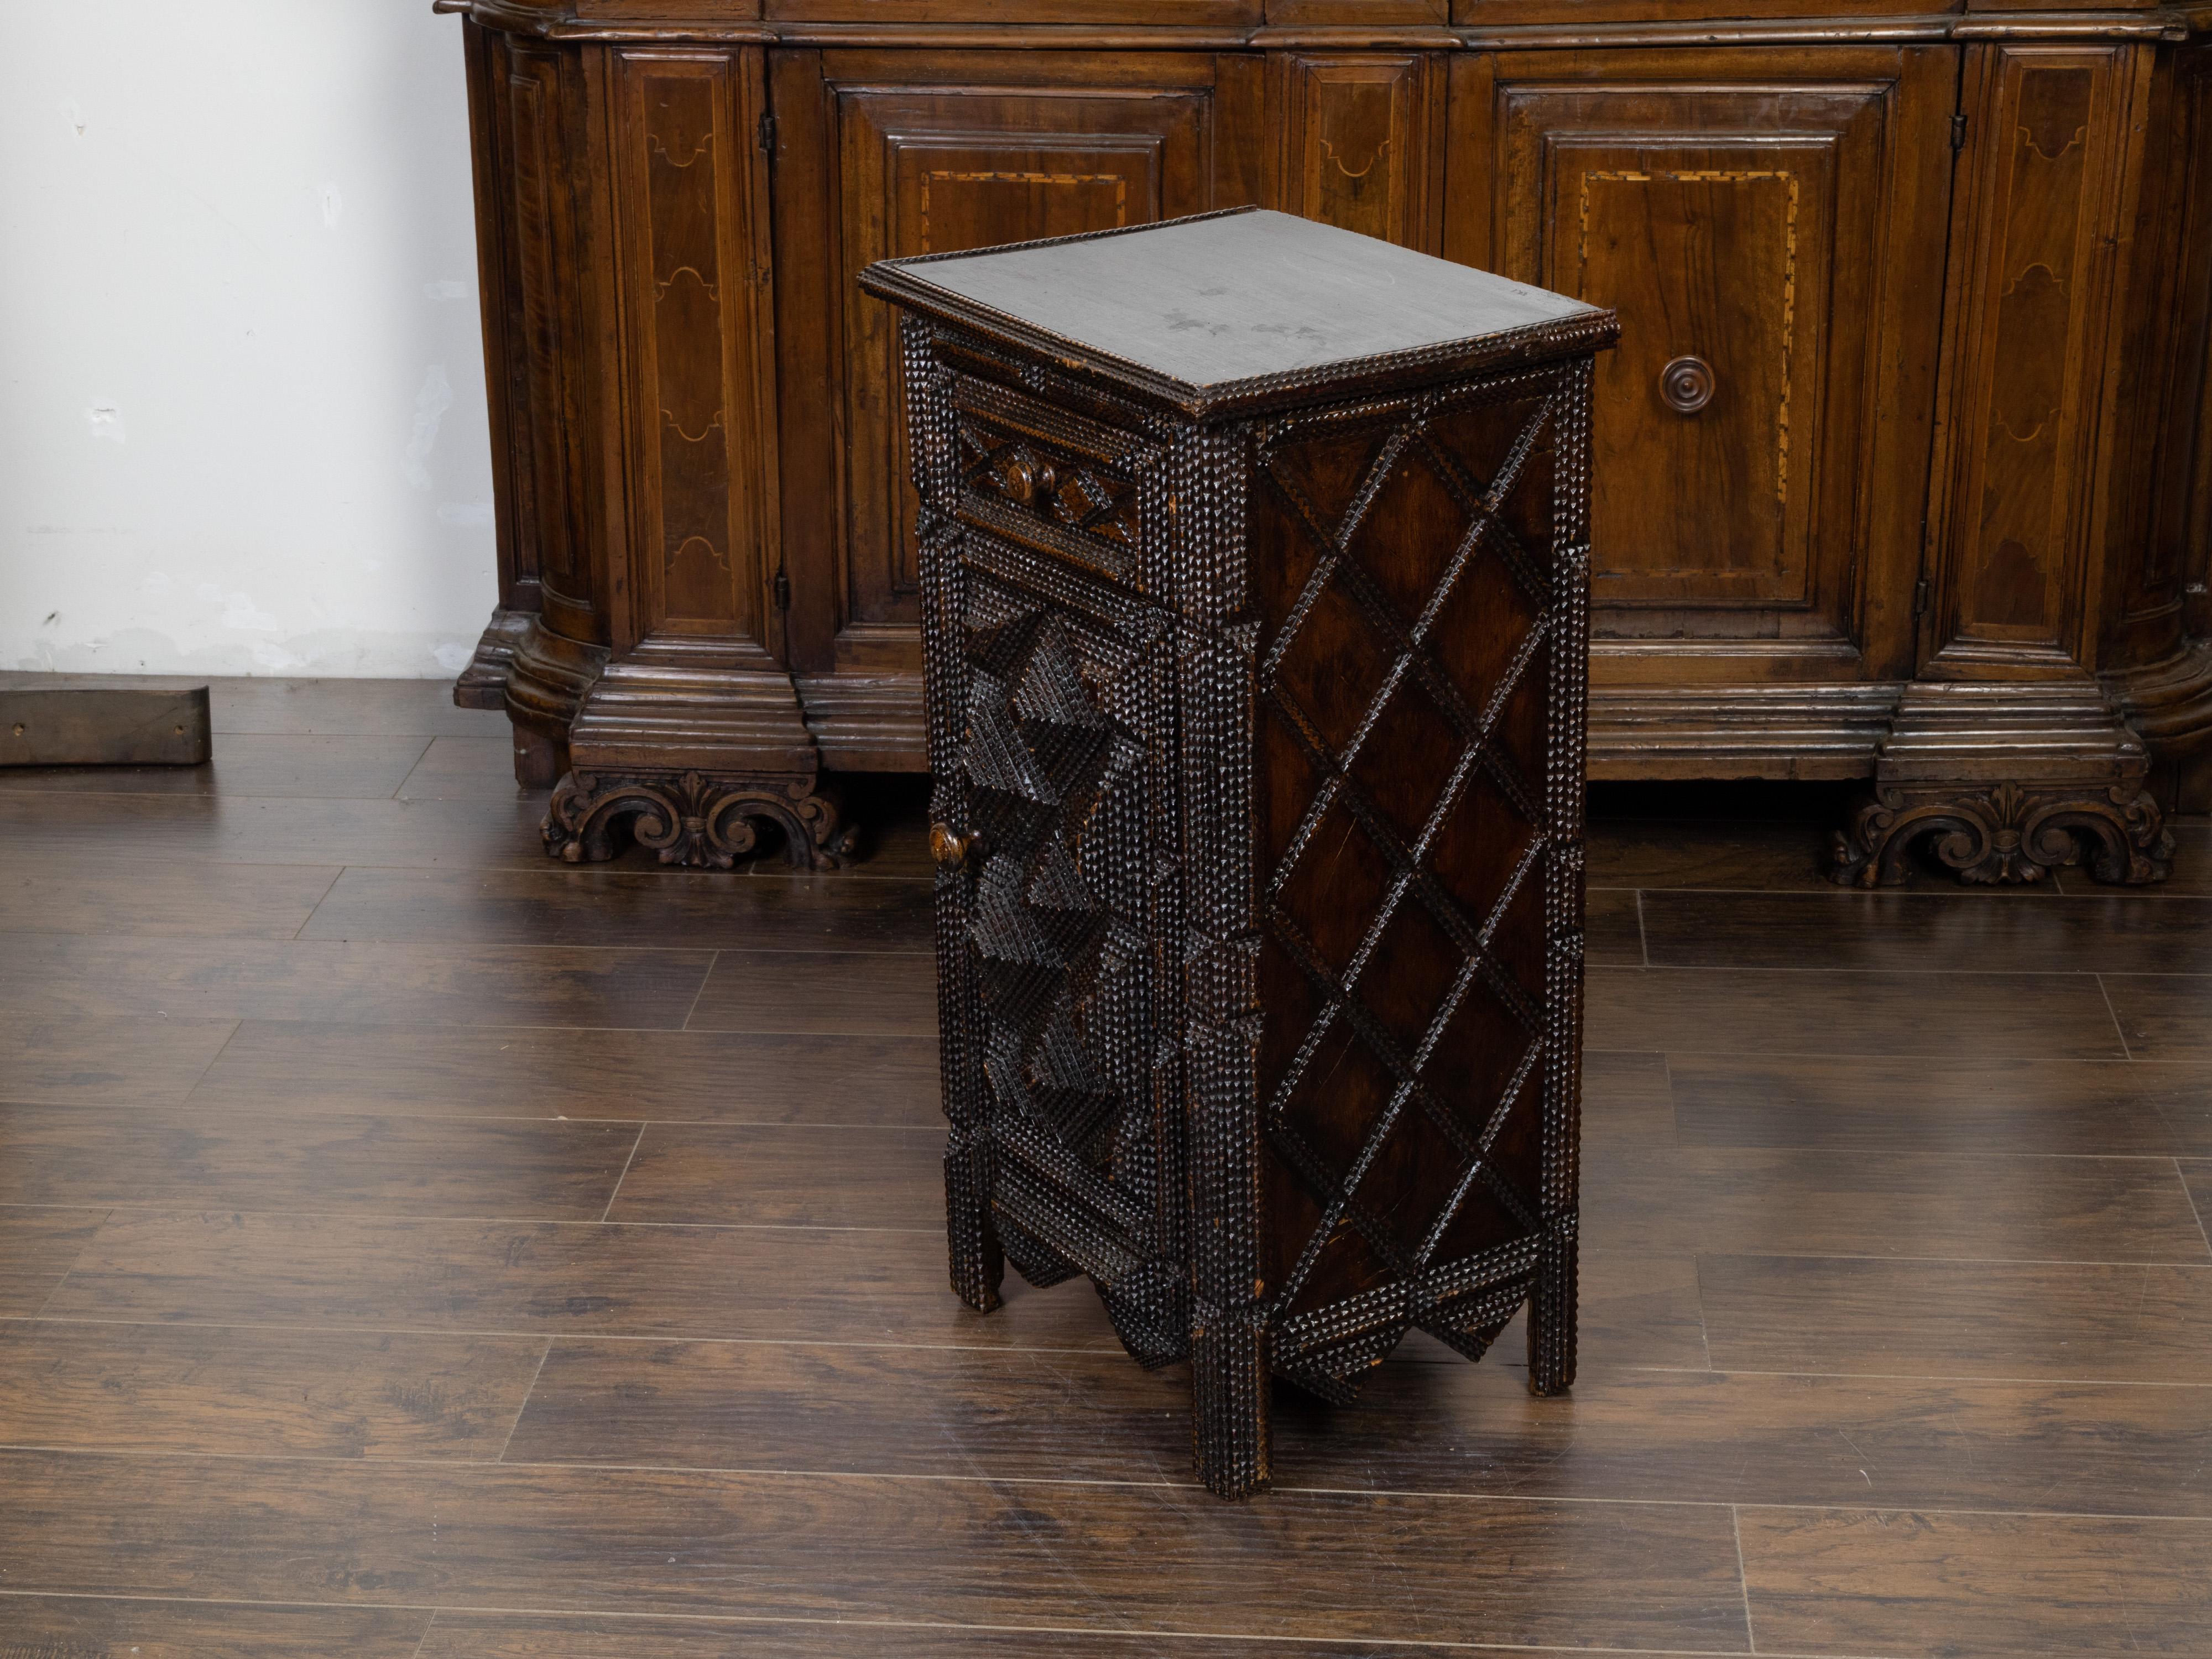 Folk Art French Tramp Art 1900s Small Cabinet with Hand-Carved Geometric Raised Motifs